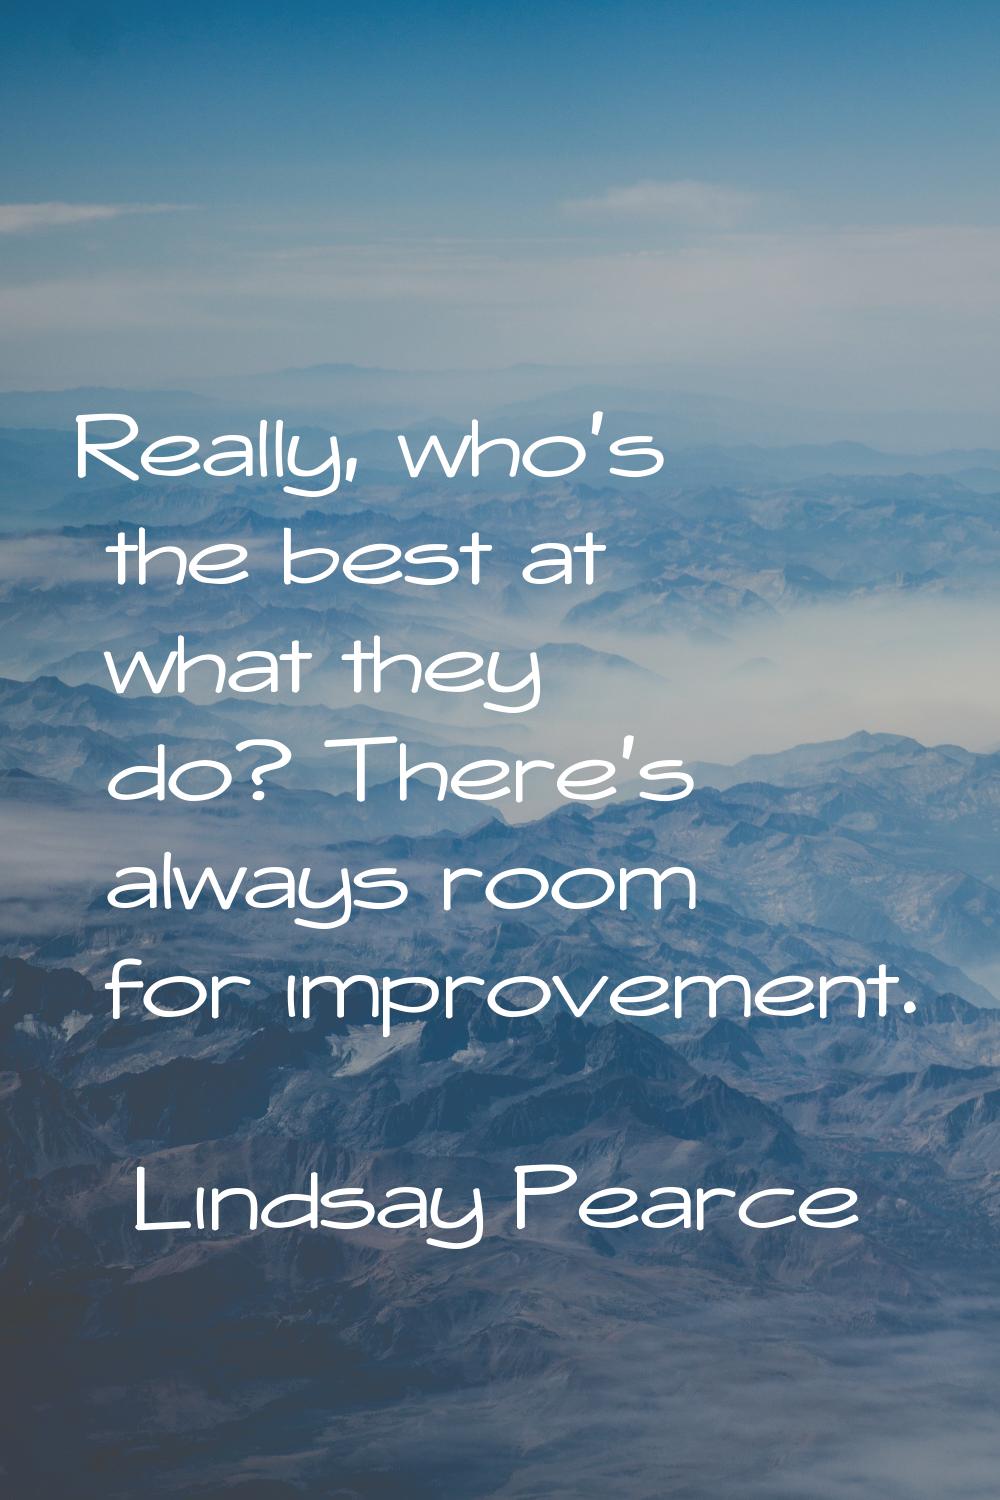 Really, who's the best at what they do? There's always room for improvement.